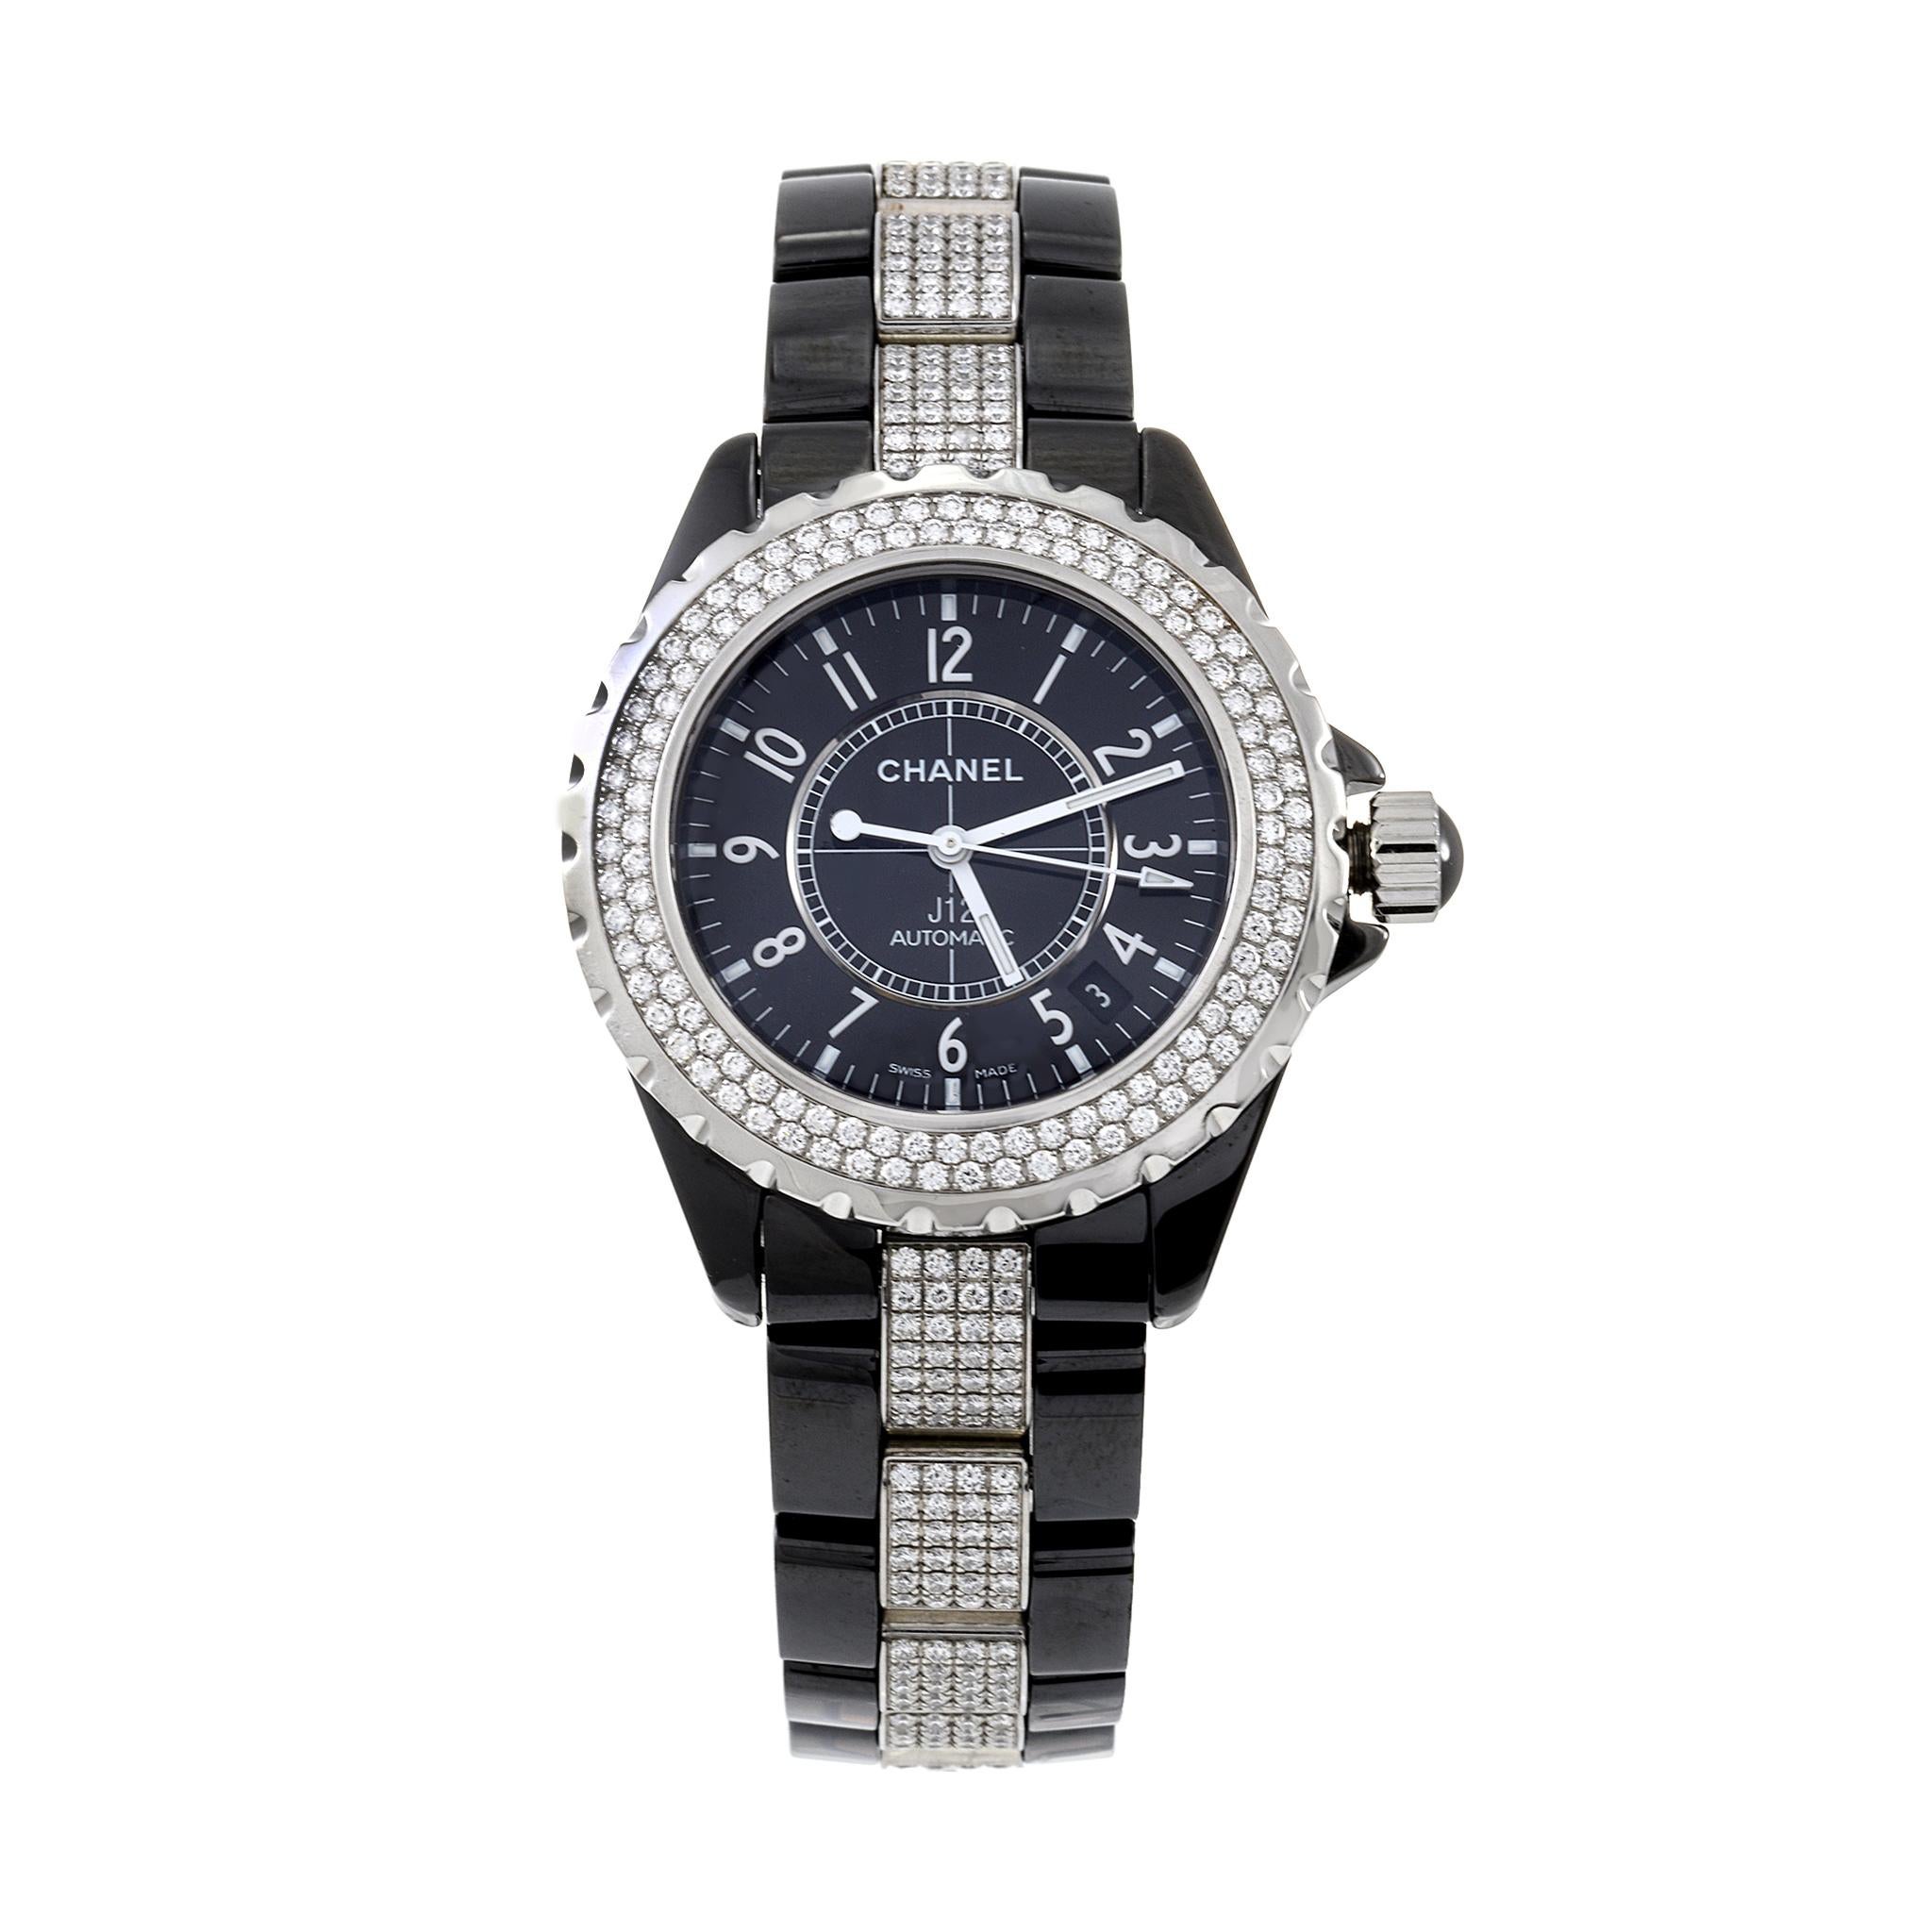 Pre-owned Good Condition Chanel J12 Automatic Ladies Watch reference H1339. The band is short and fits 6 inches wrist size, and has a few hairline scratches on links. Features: 38mm Black Ceramic Case with a Black Ceramic Bracelet with Diamond